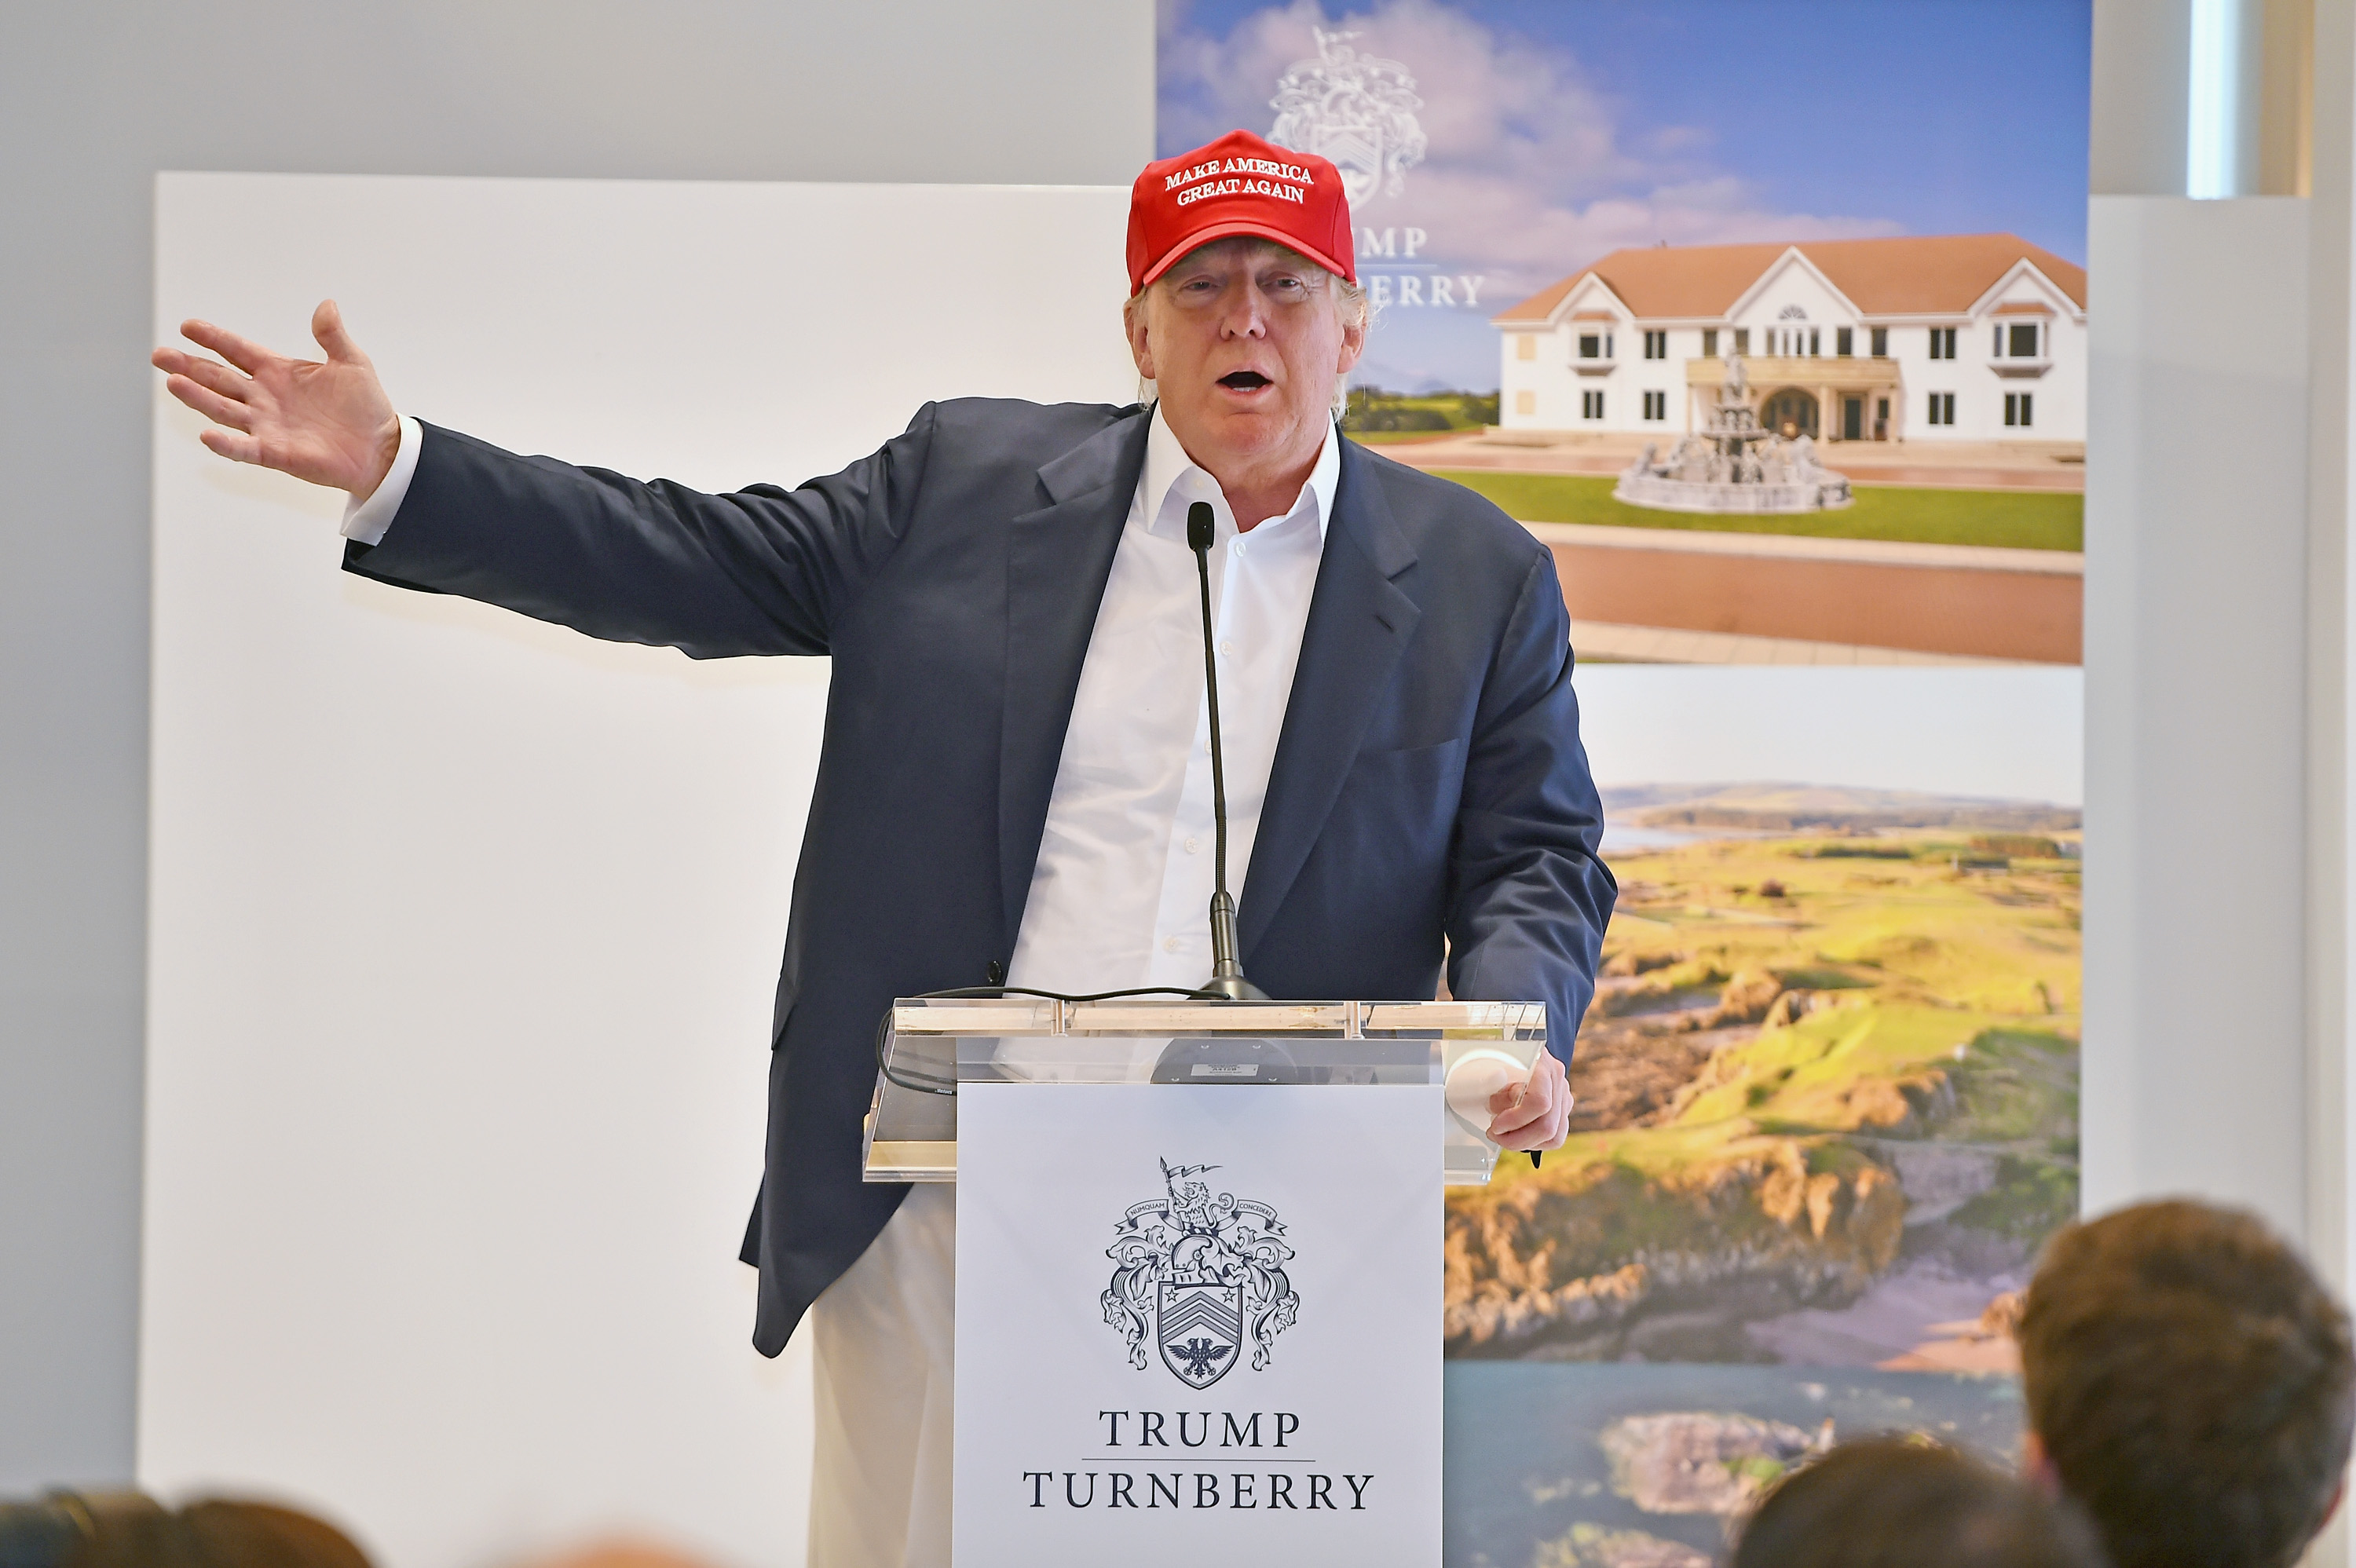 Trump has revamped Turnberry since buying it last year (Photo: Getty Images)